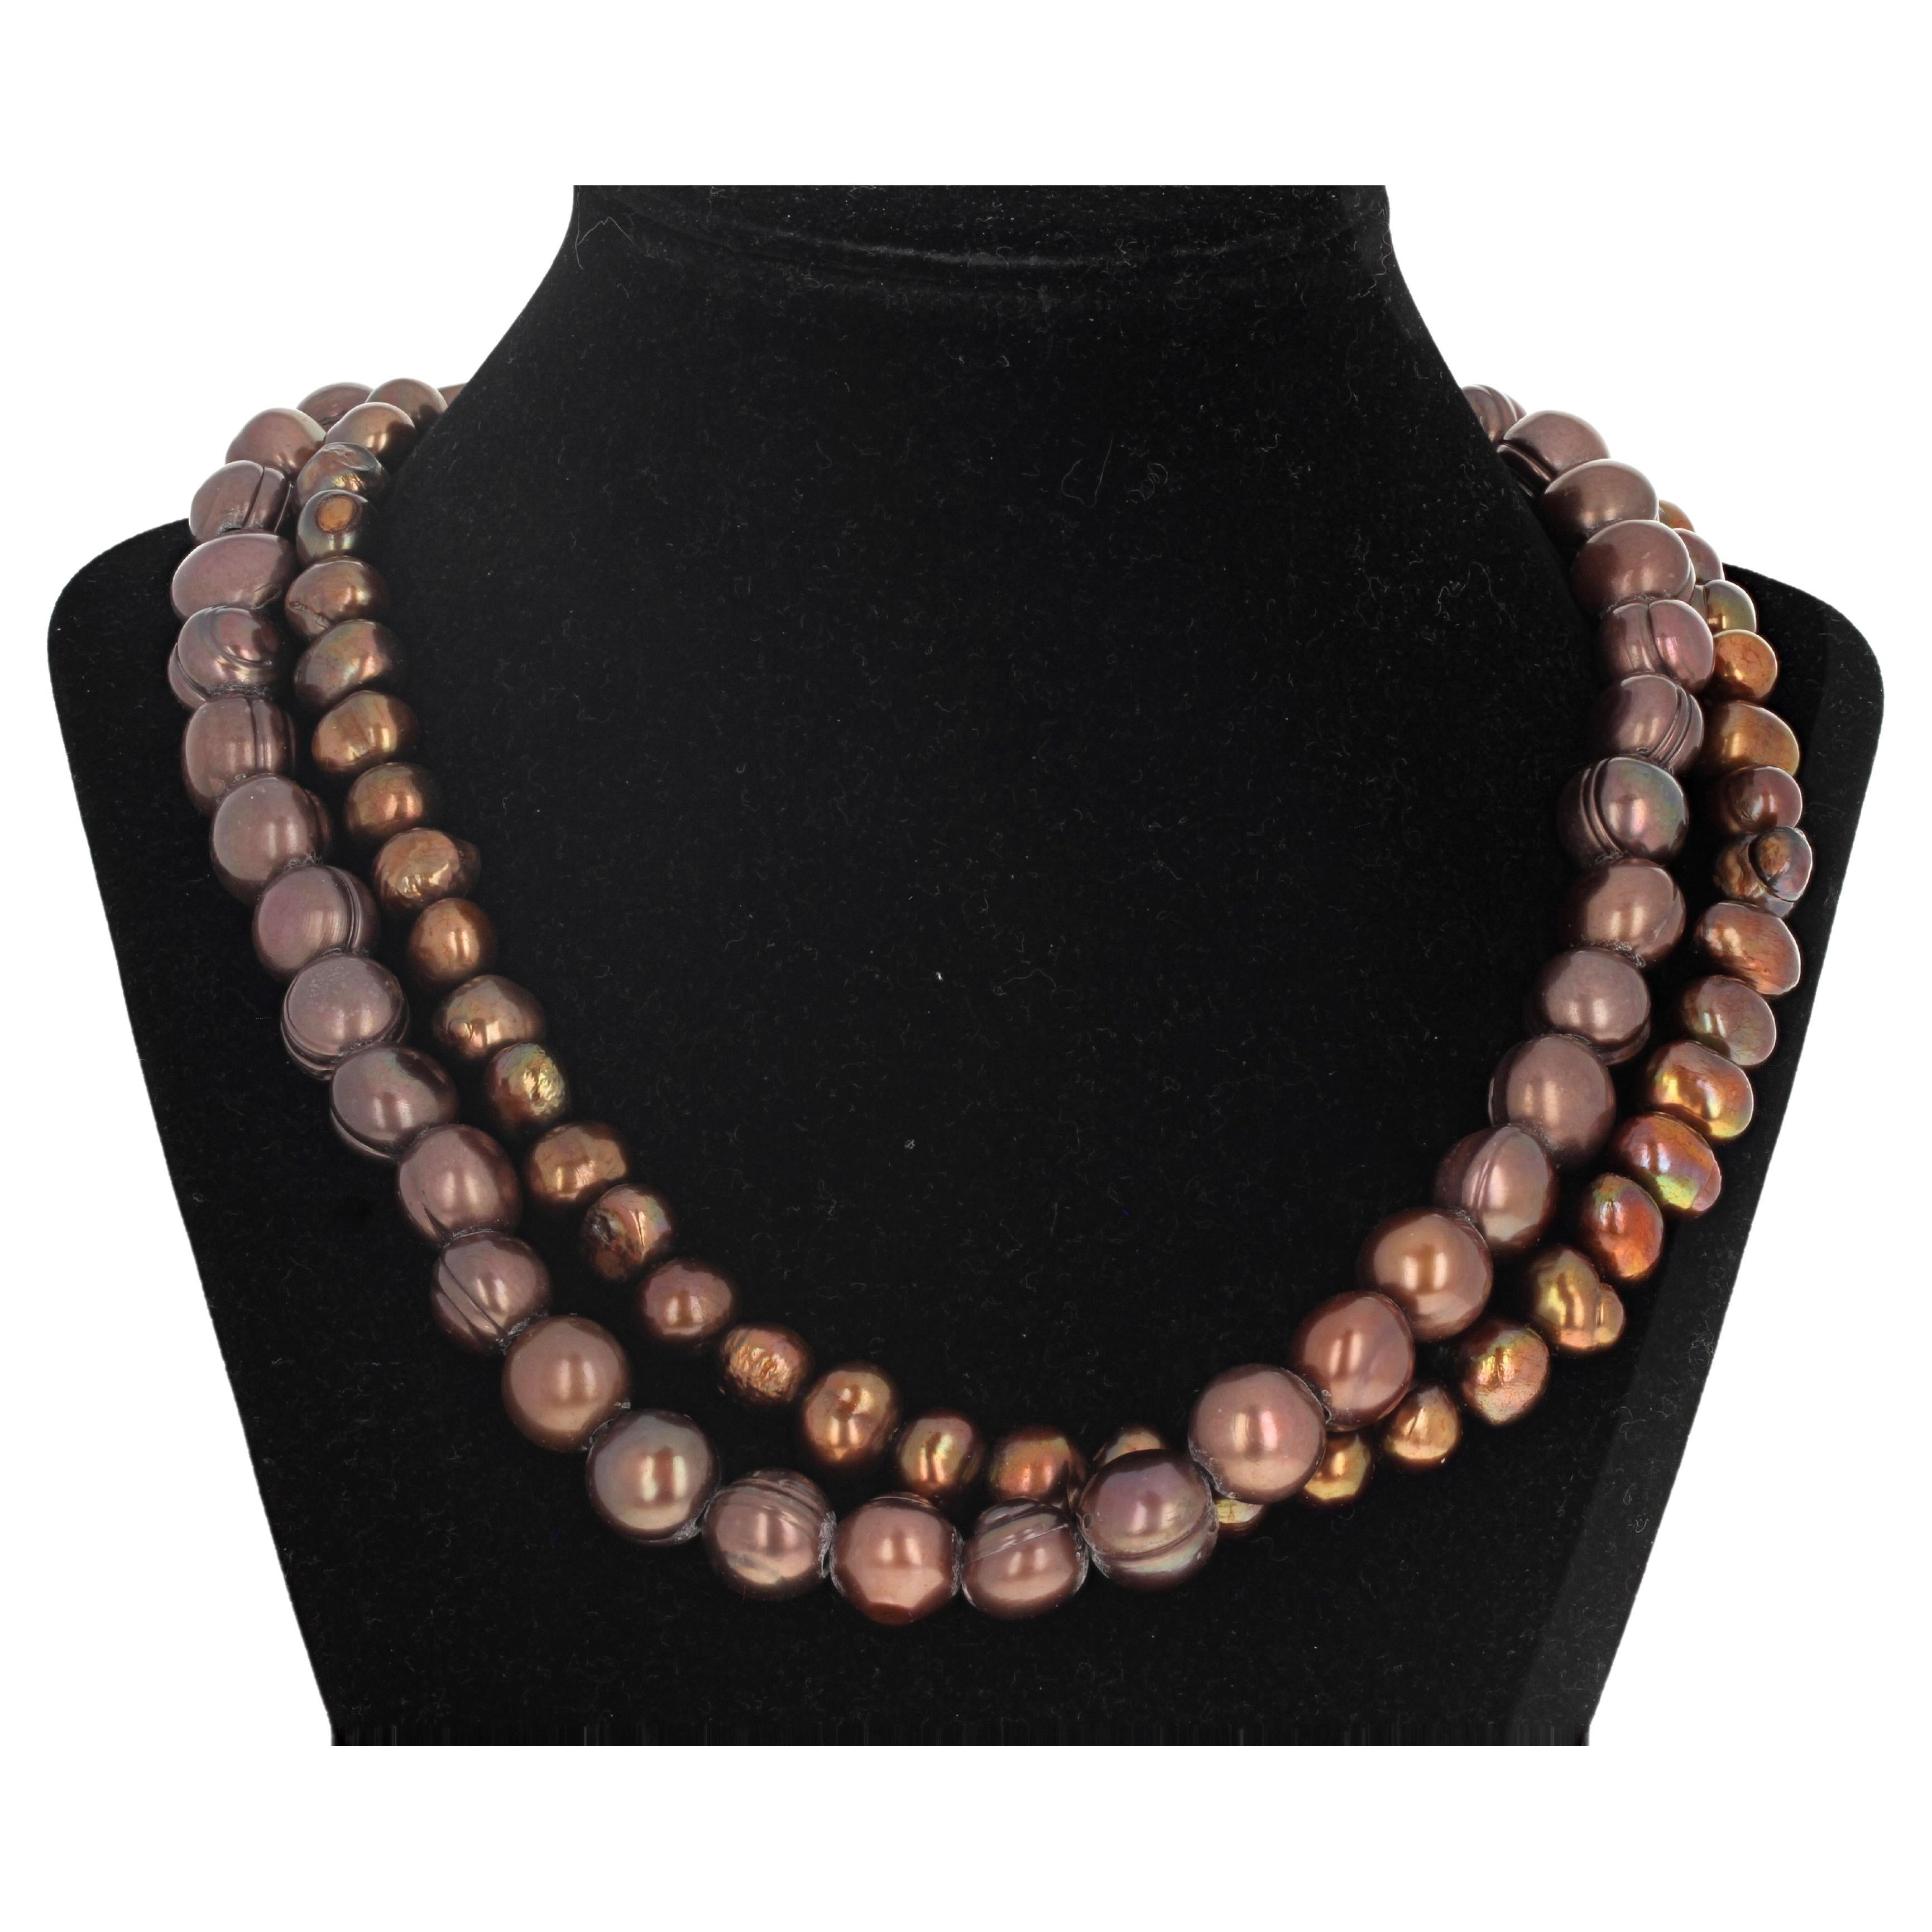 AJD Double Strand of Magnificently Glowing Natural Cultured Pearls 19" Necklace